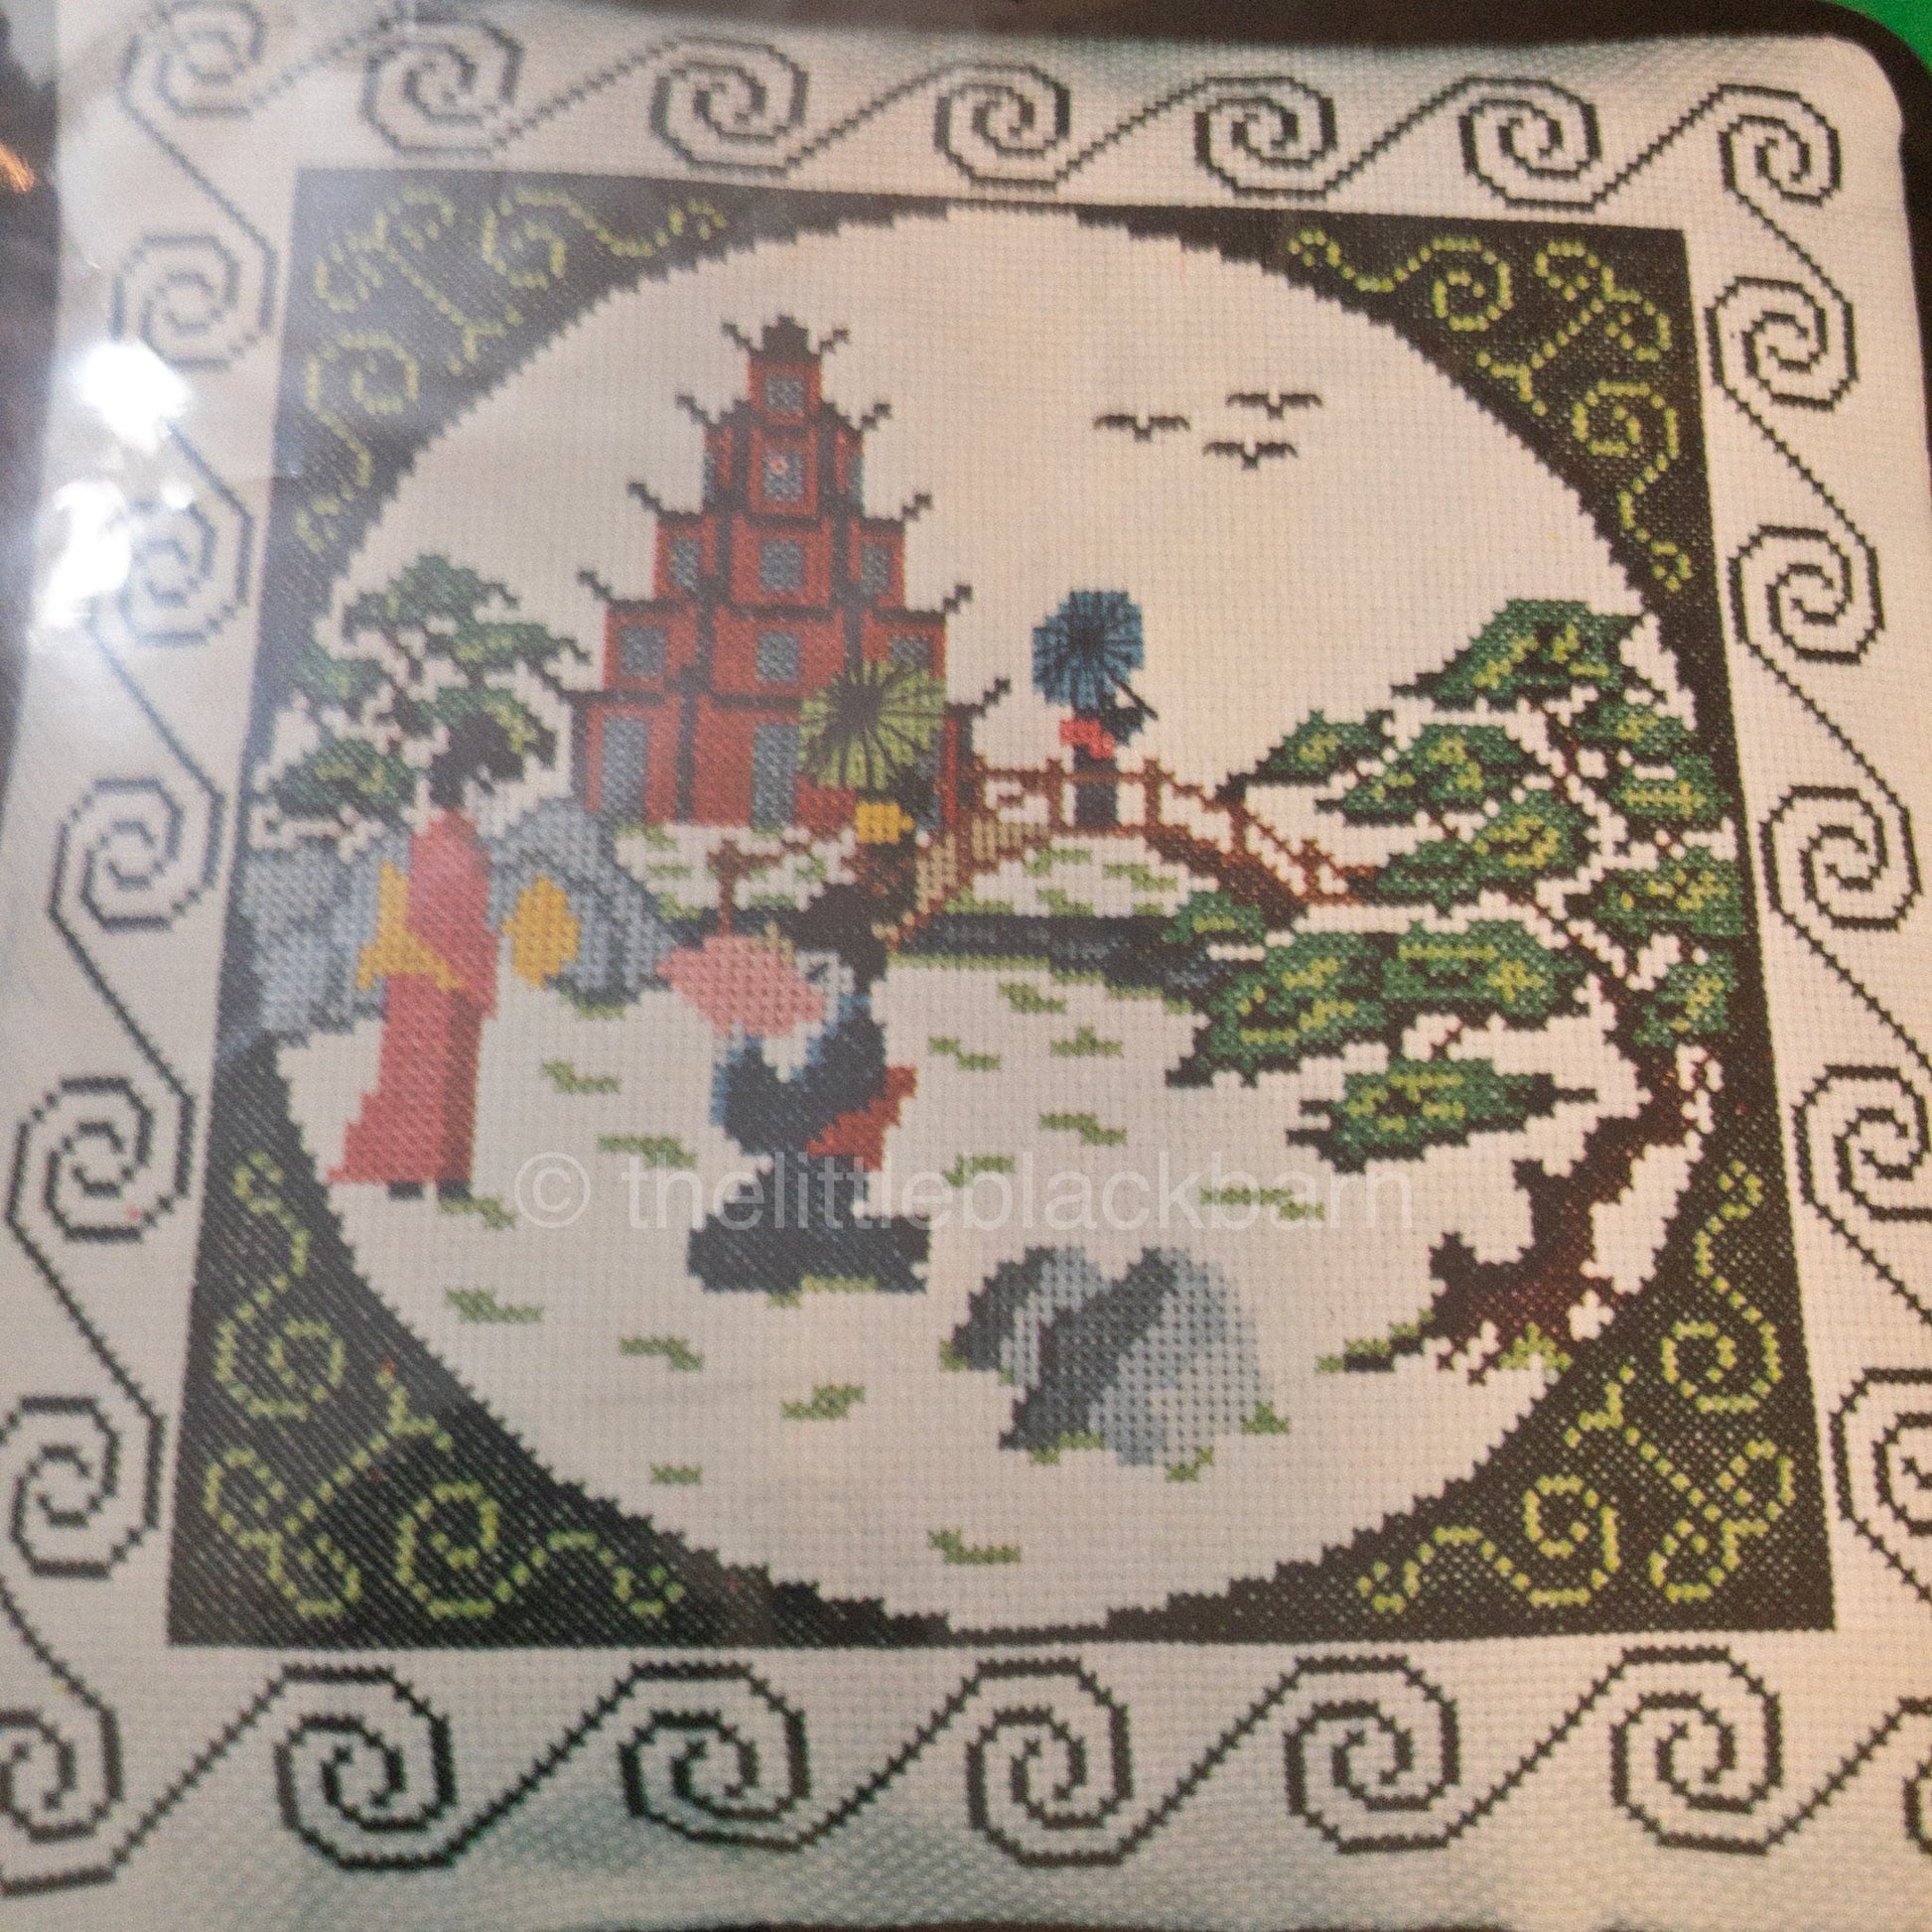 Carolina Cross Stitch, Oriental Afternoon, Vintage 1977, Kit 10 by 10 Inches*